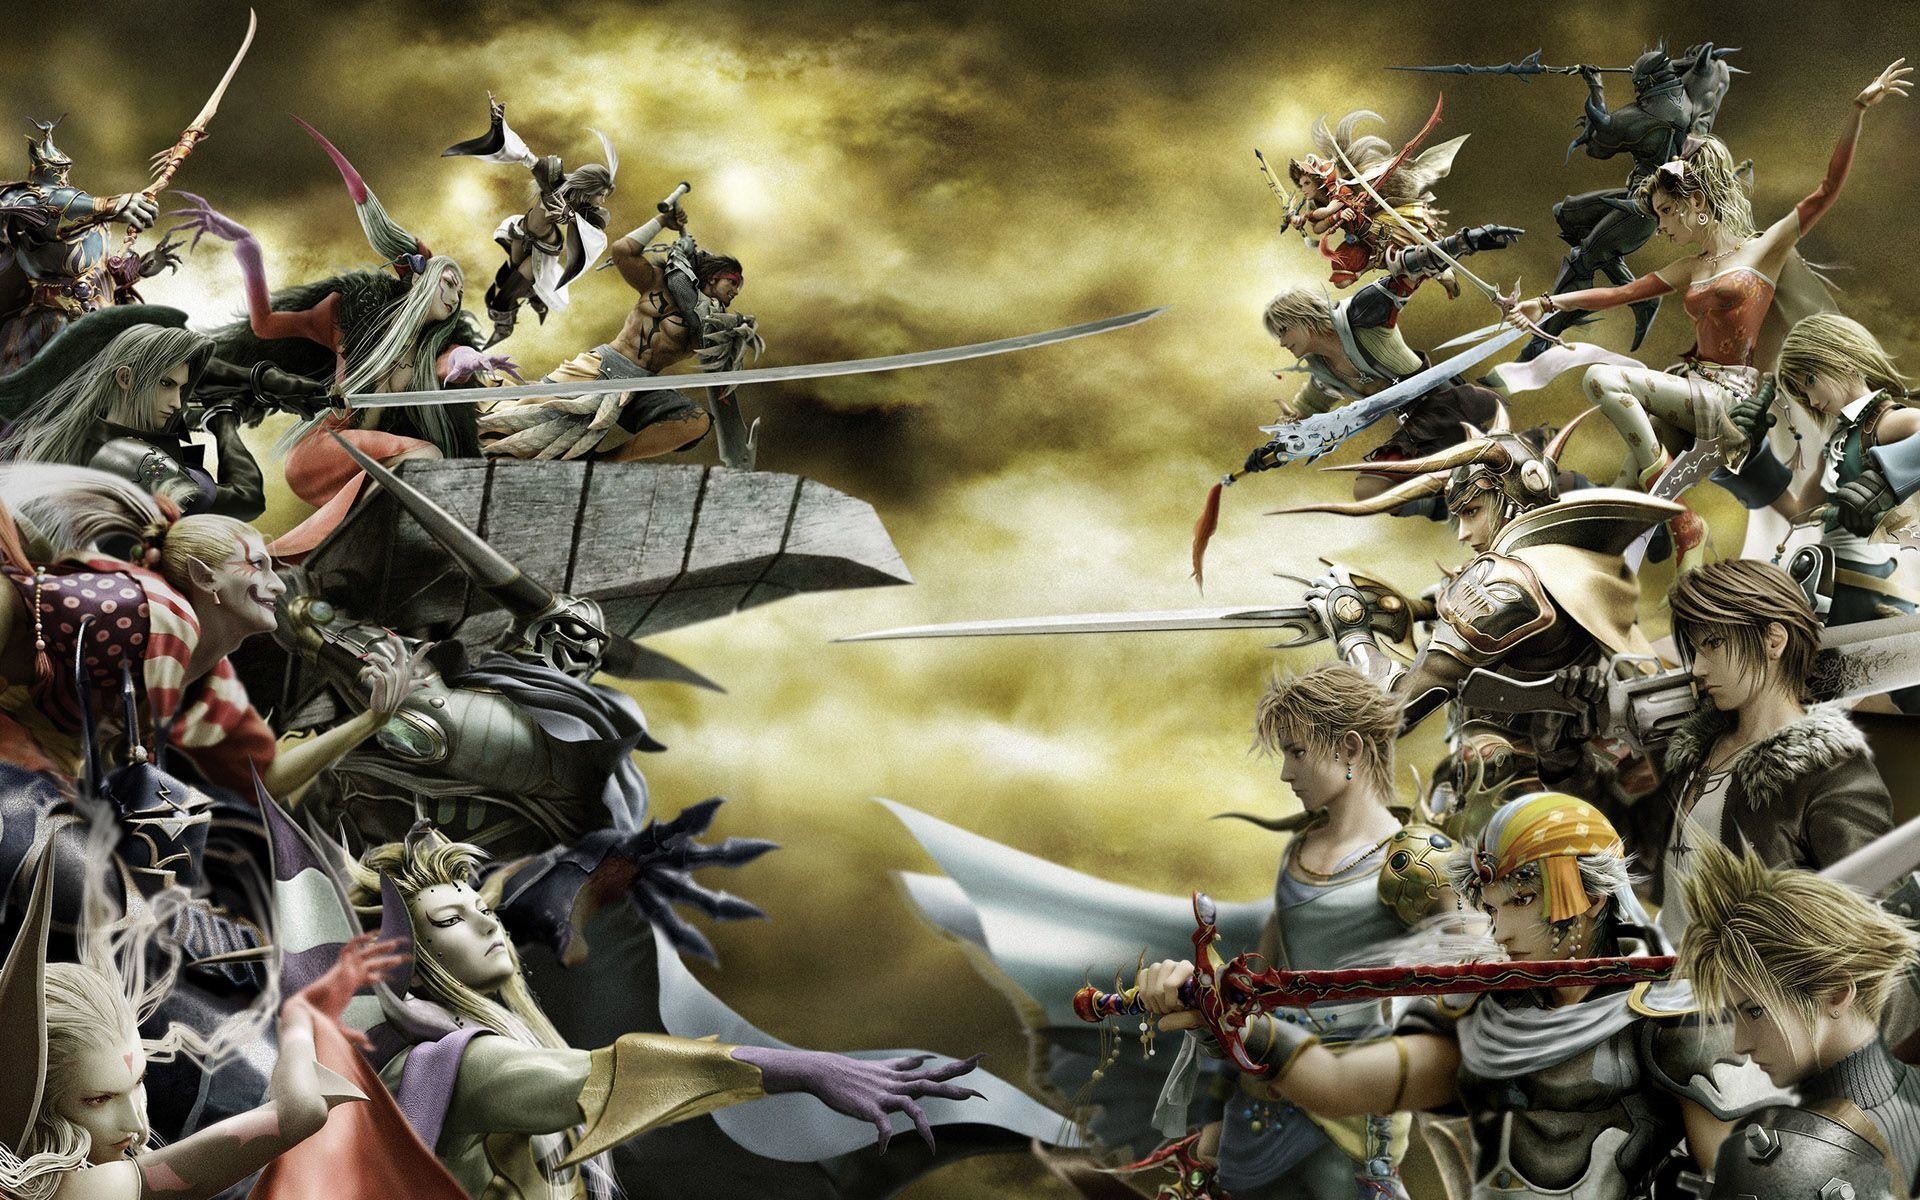 1920x1200 Final Fantasy wallpapers 14330 - Games - Television / Games